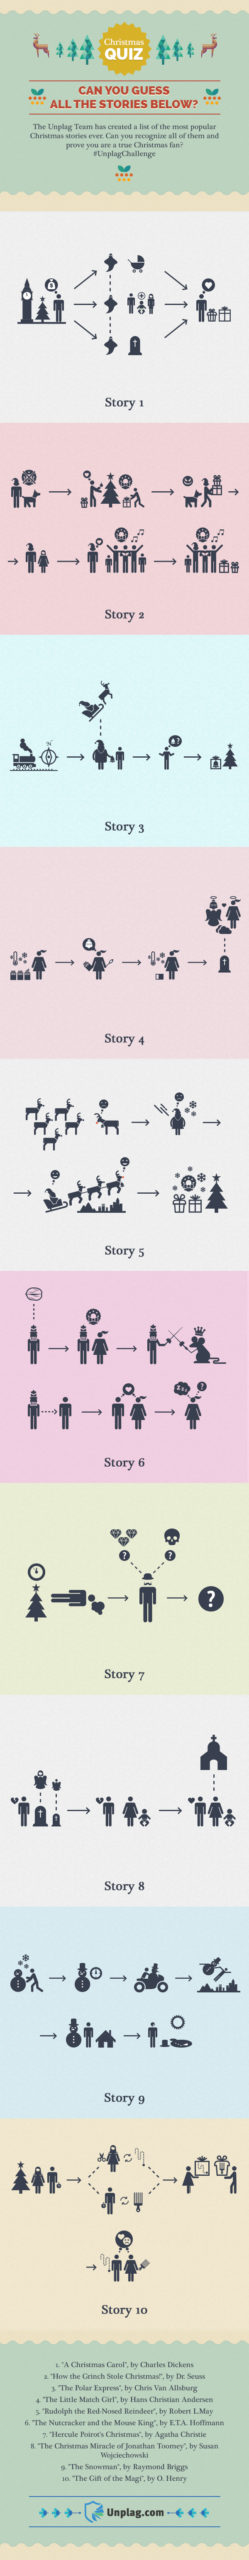 Grab+Your+Chance+to+Take+a+Christmas+Story+Quiz+by+Unplag